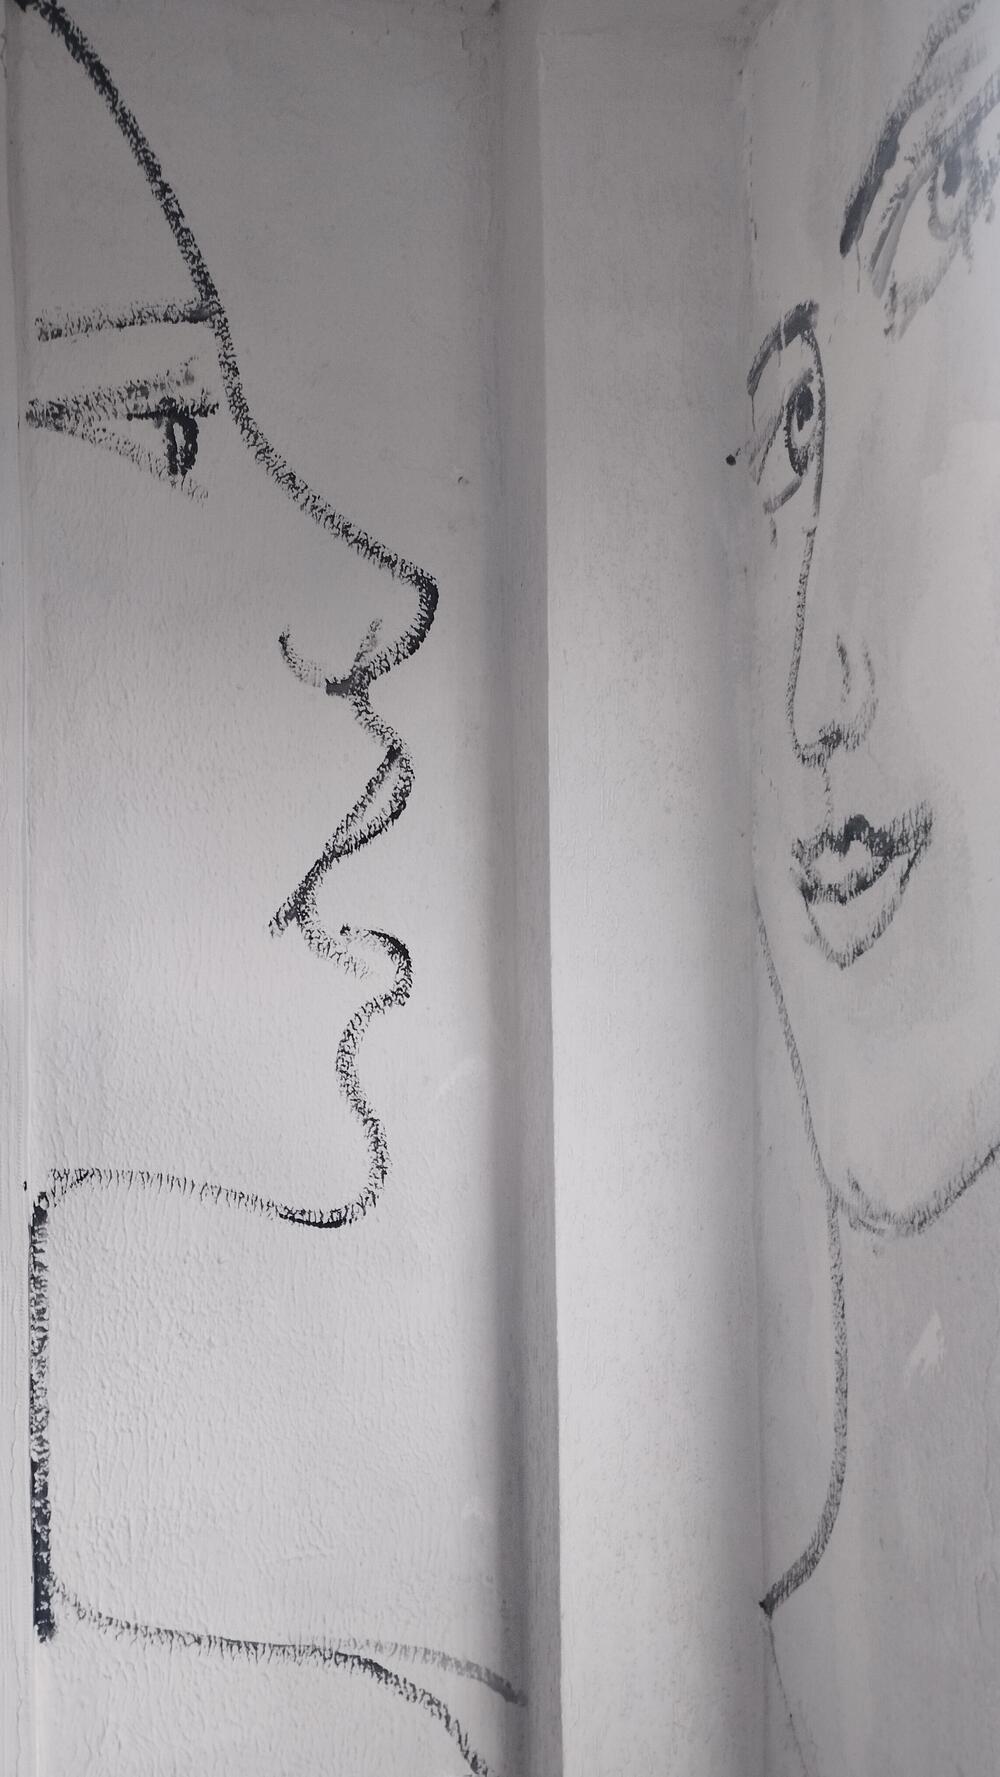 Nikčević's drawings on the walls of the gallery